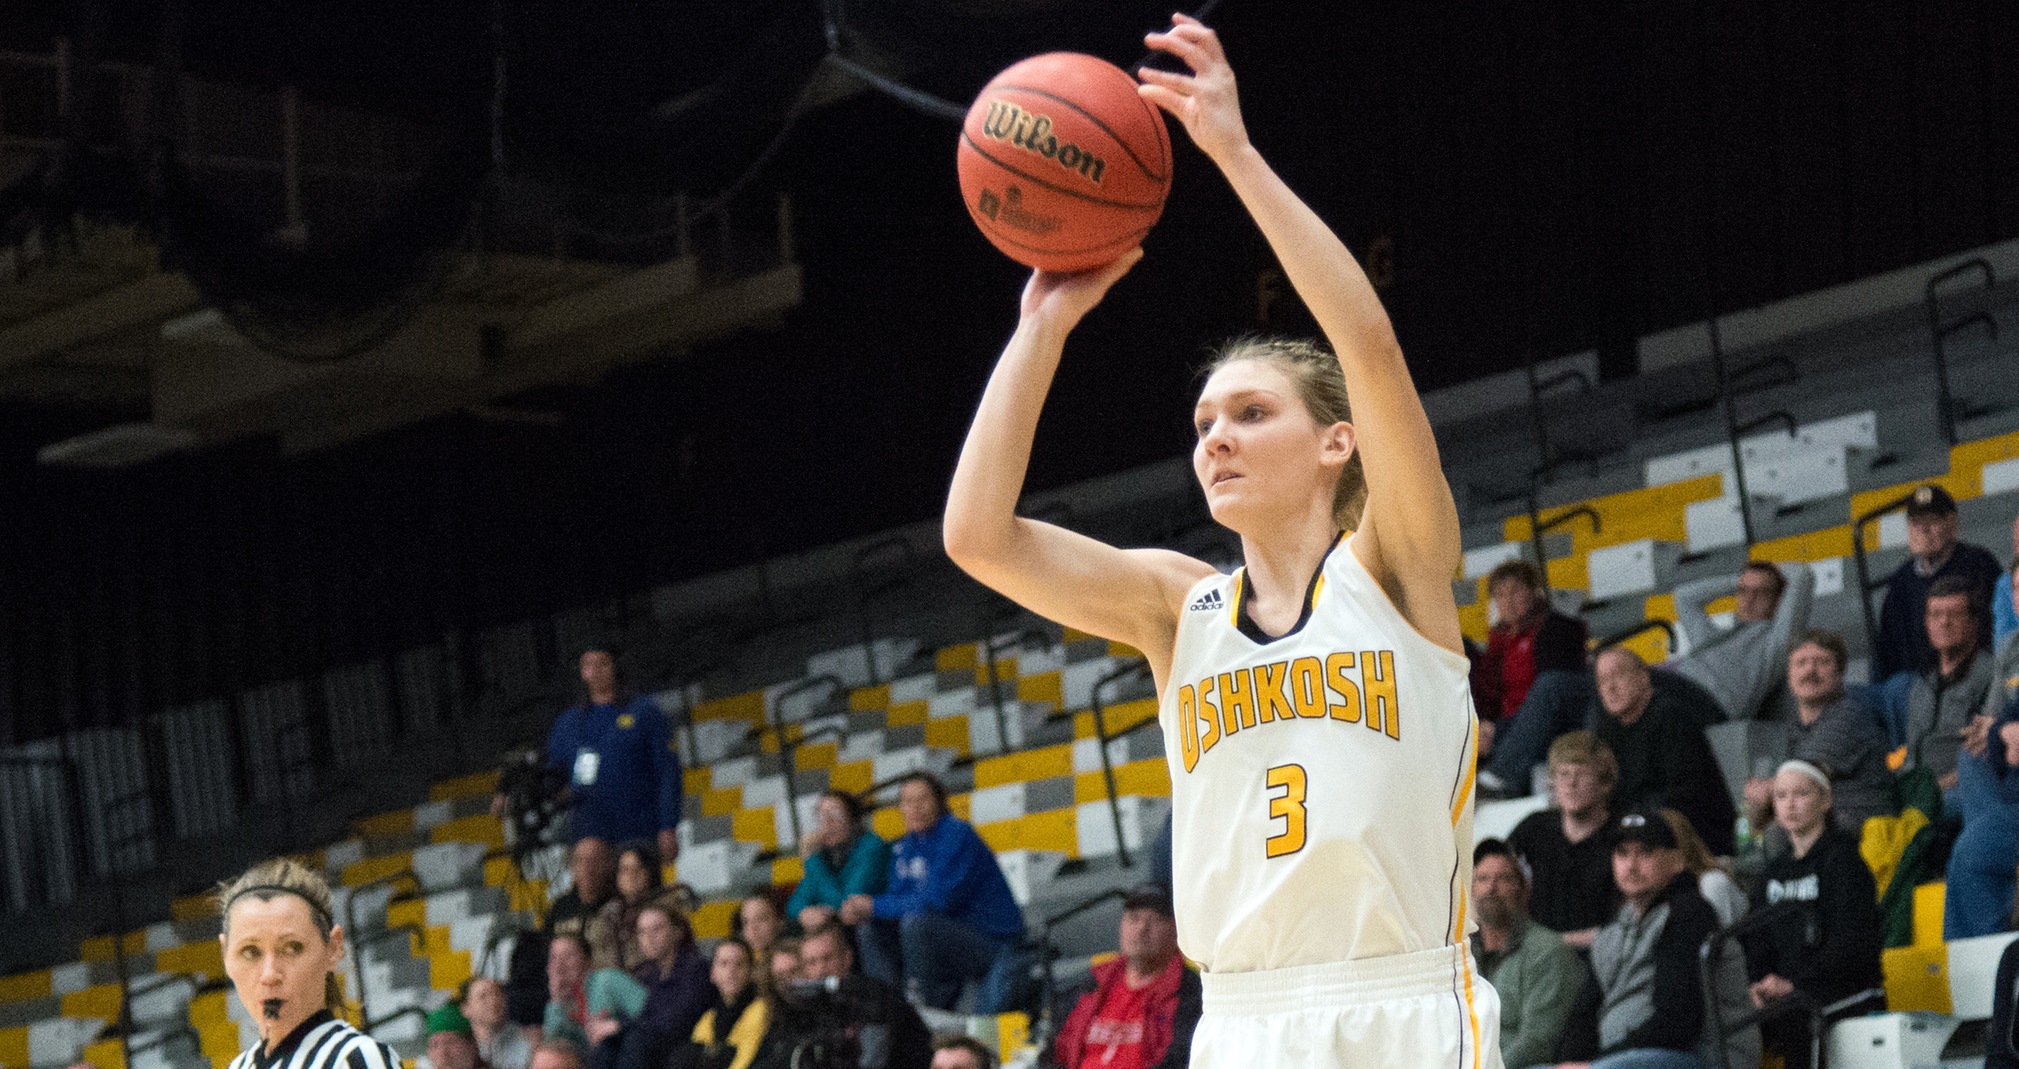 Jaimee Pitt led four Titans in double-figure scoring against the V-Hawks with 14 points.